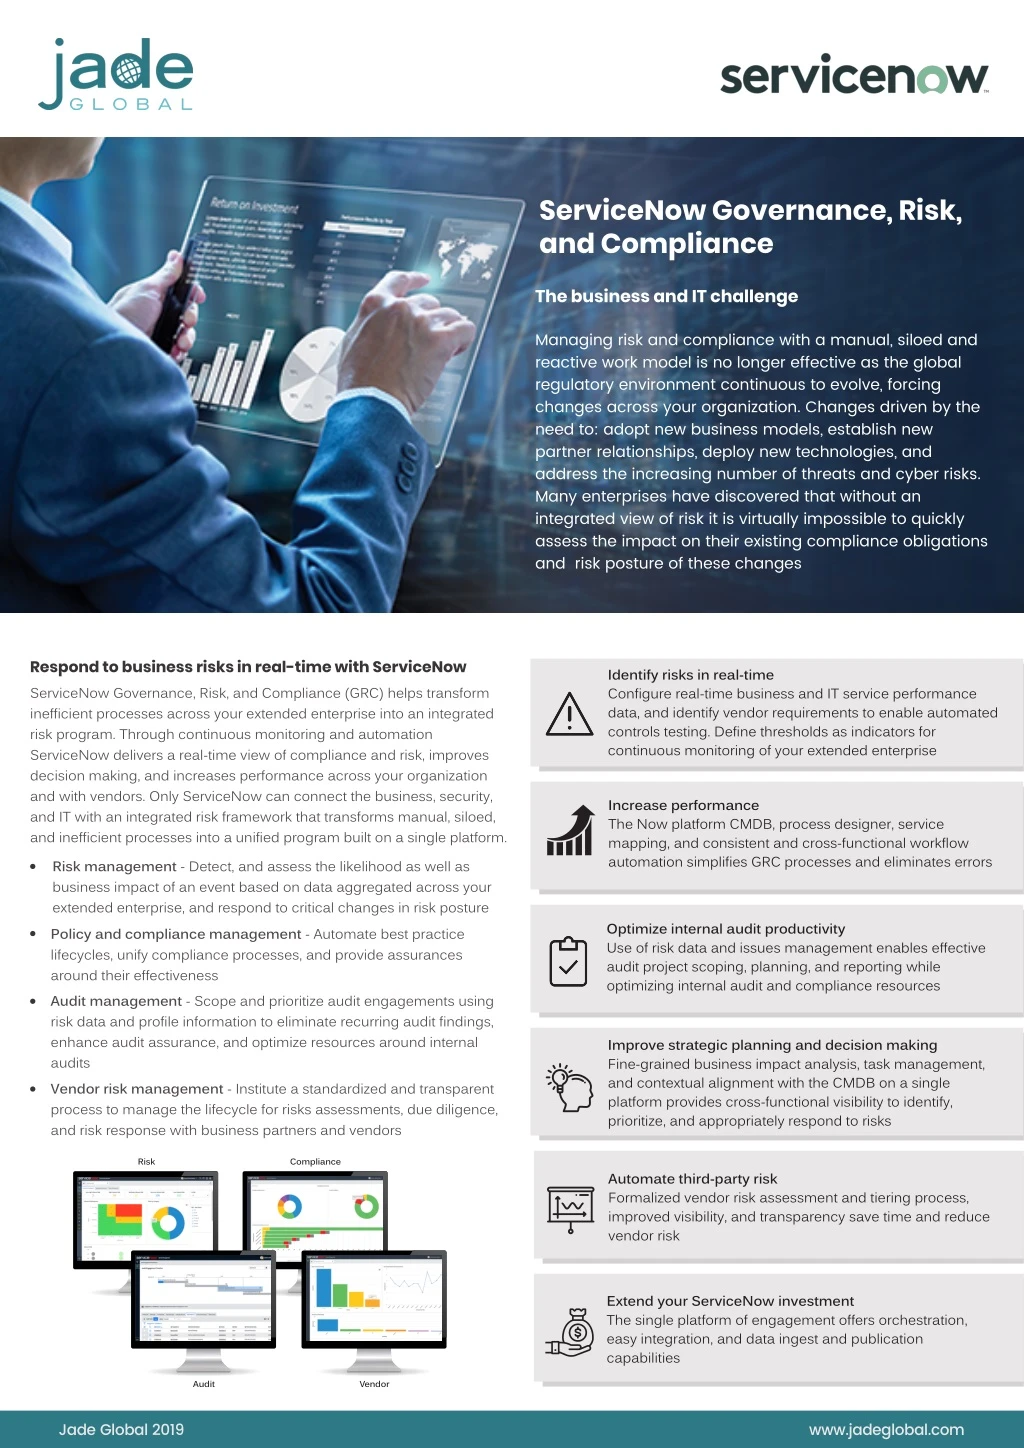 servicenow governance risk and compliance